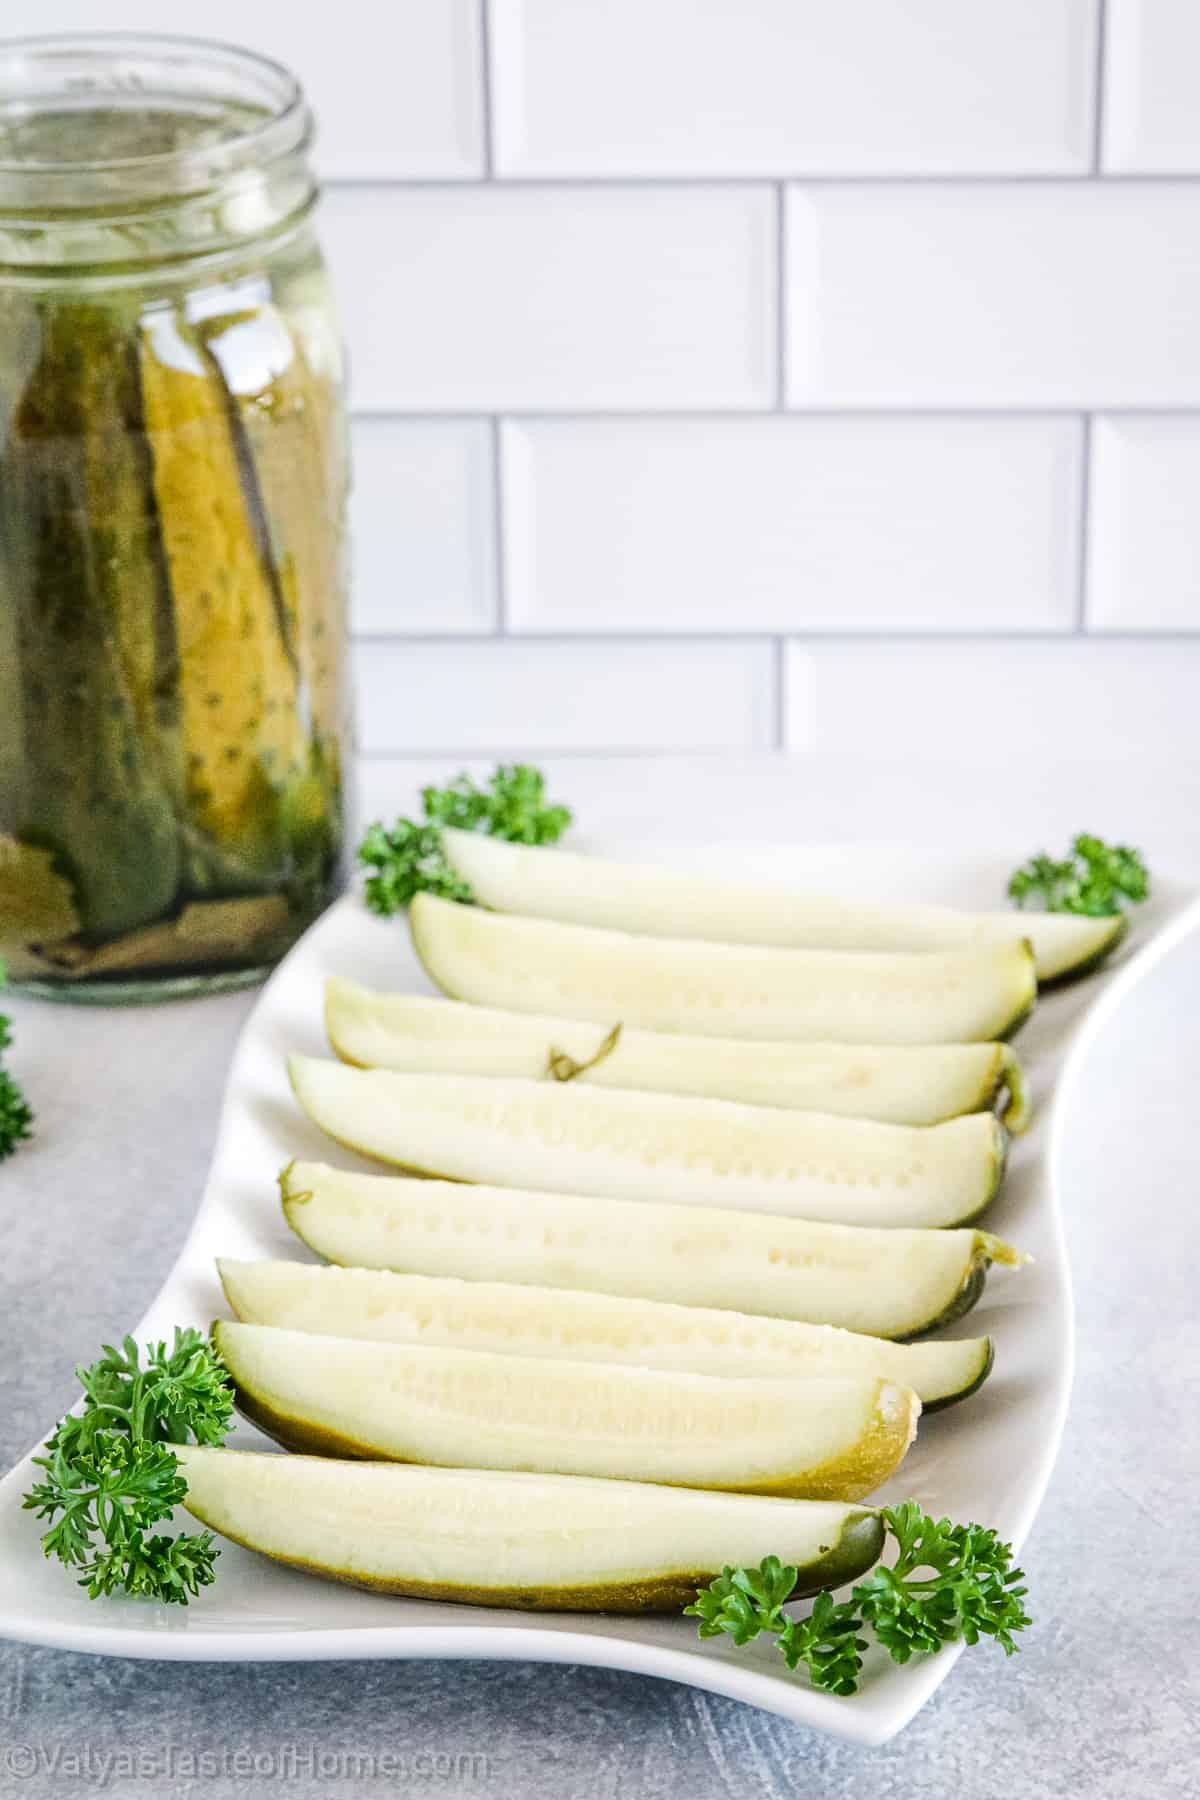 These refrigerator pickles make an awesome snack by themselves, but they also go great with sandwiches and burgers. They taste kind of in-between garden fresh cucumbers and canned and aged pickles.